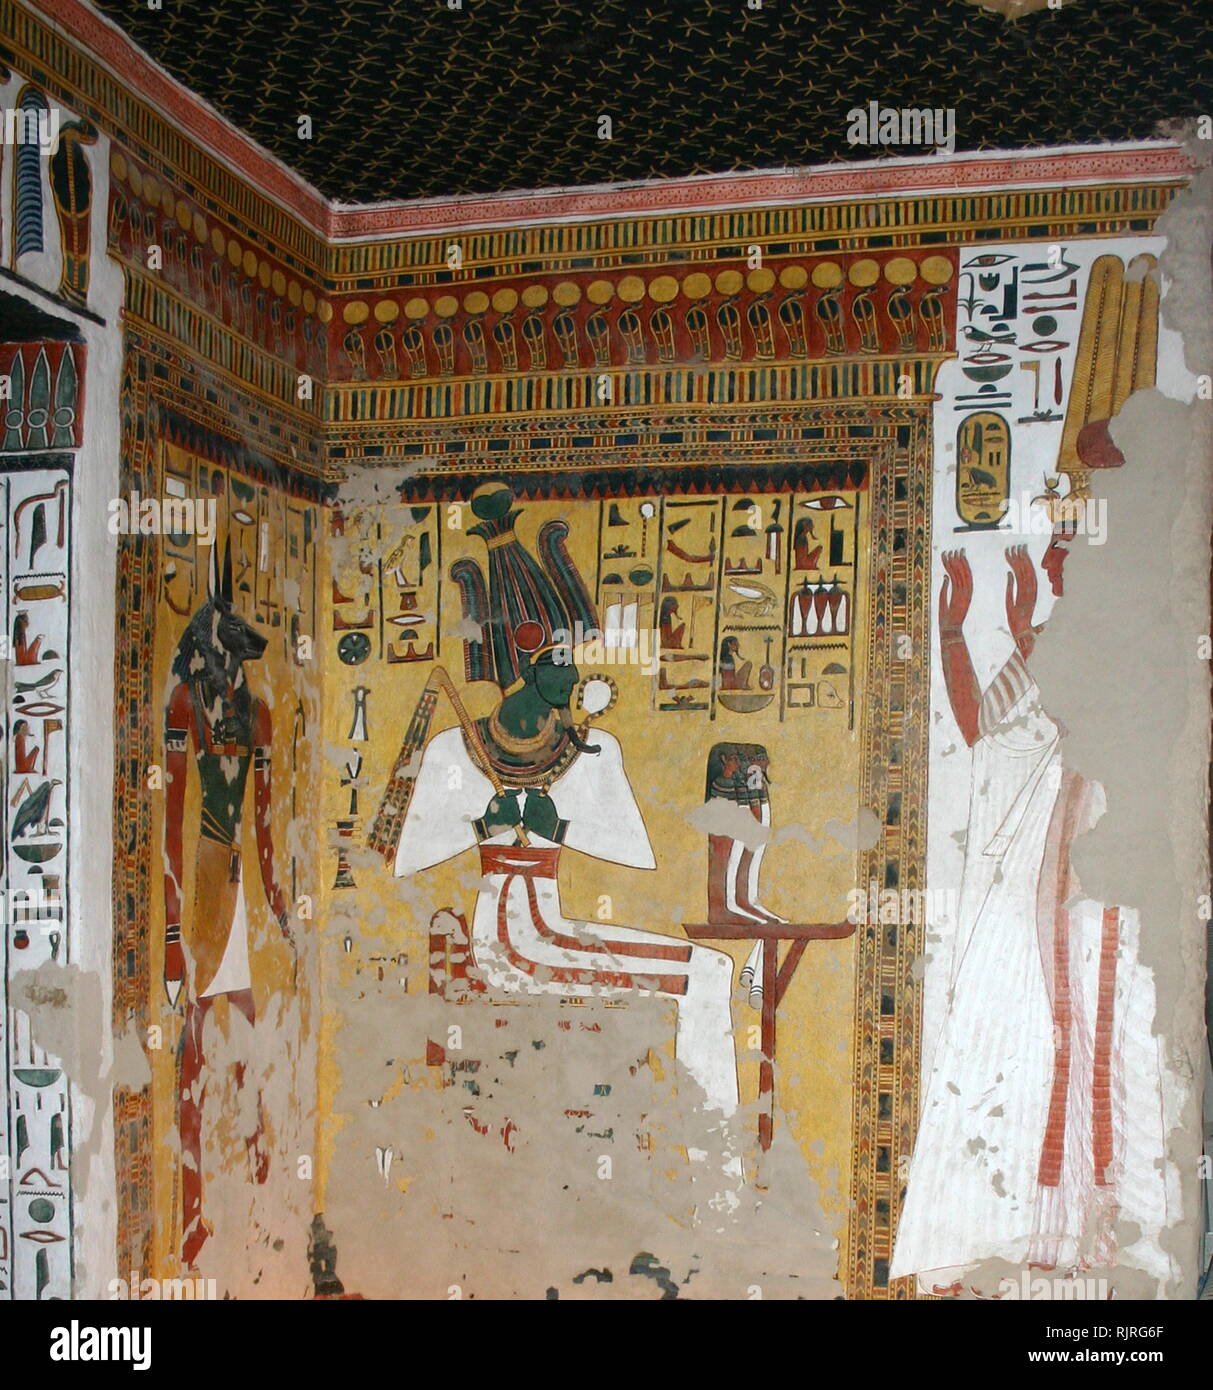 The God Osiris depicted in a wall Painting, Inside the tomb (QV66) of Nefertari, in Egypt's Valley of the Queens. It was discovered by Ernesto Schiaparelli in 1904. It is called the Sistine Chapel of Ancient Egypt. In the Valley of the Queens, Nefertari's tomb once held the mummified body and representative symbolisms of her, like what most Egyptian tombs consisted of. Now, everything had been looted except for two thirds of the 5,200 square feet of wall paintings. ca. 1255 BC Stock Photo